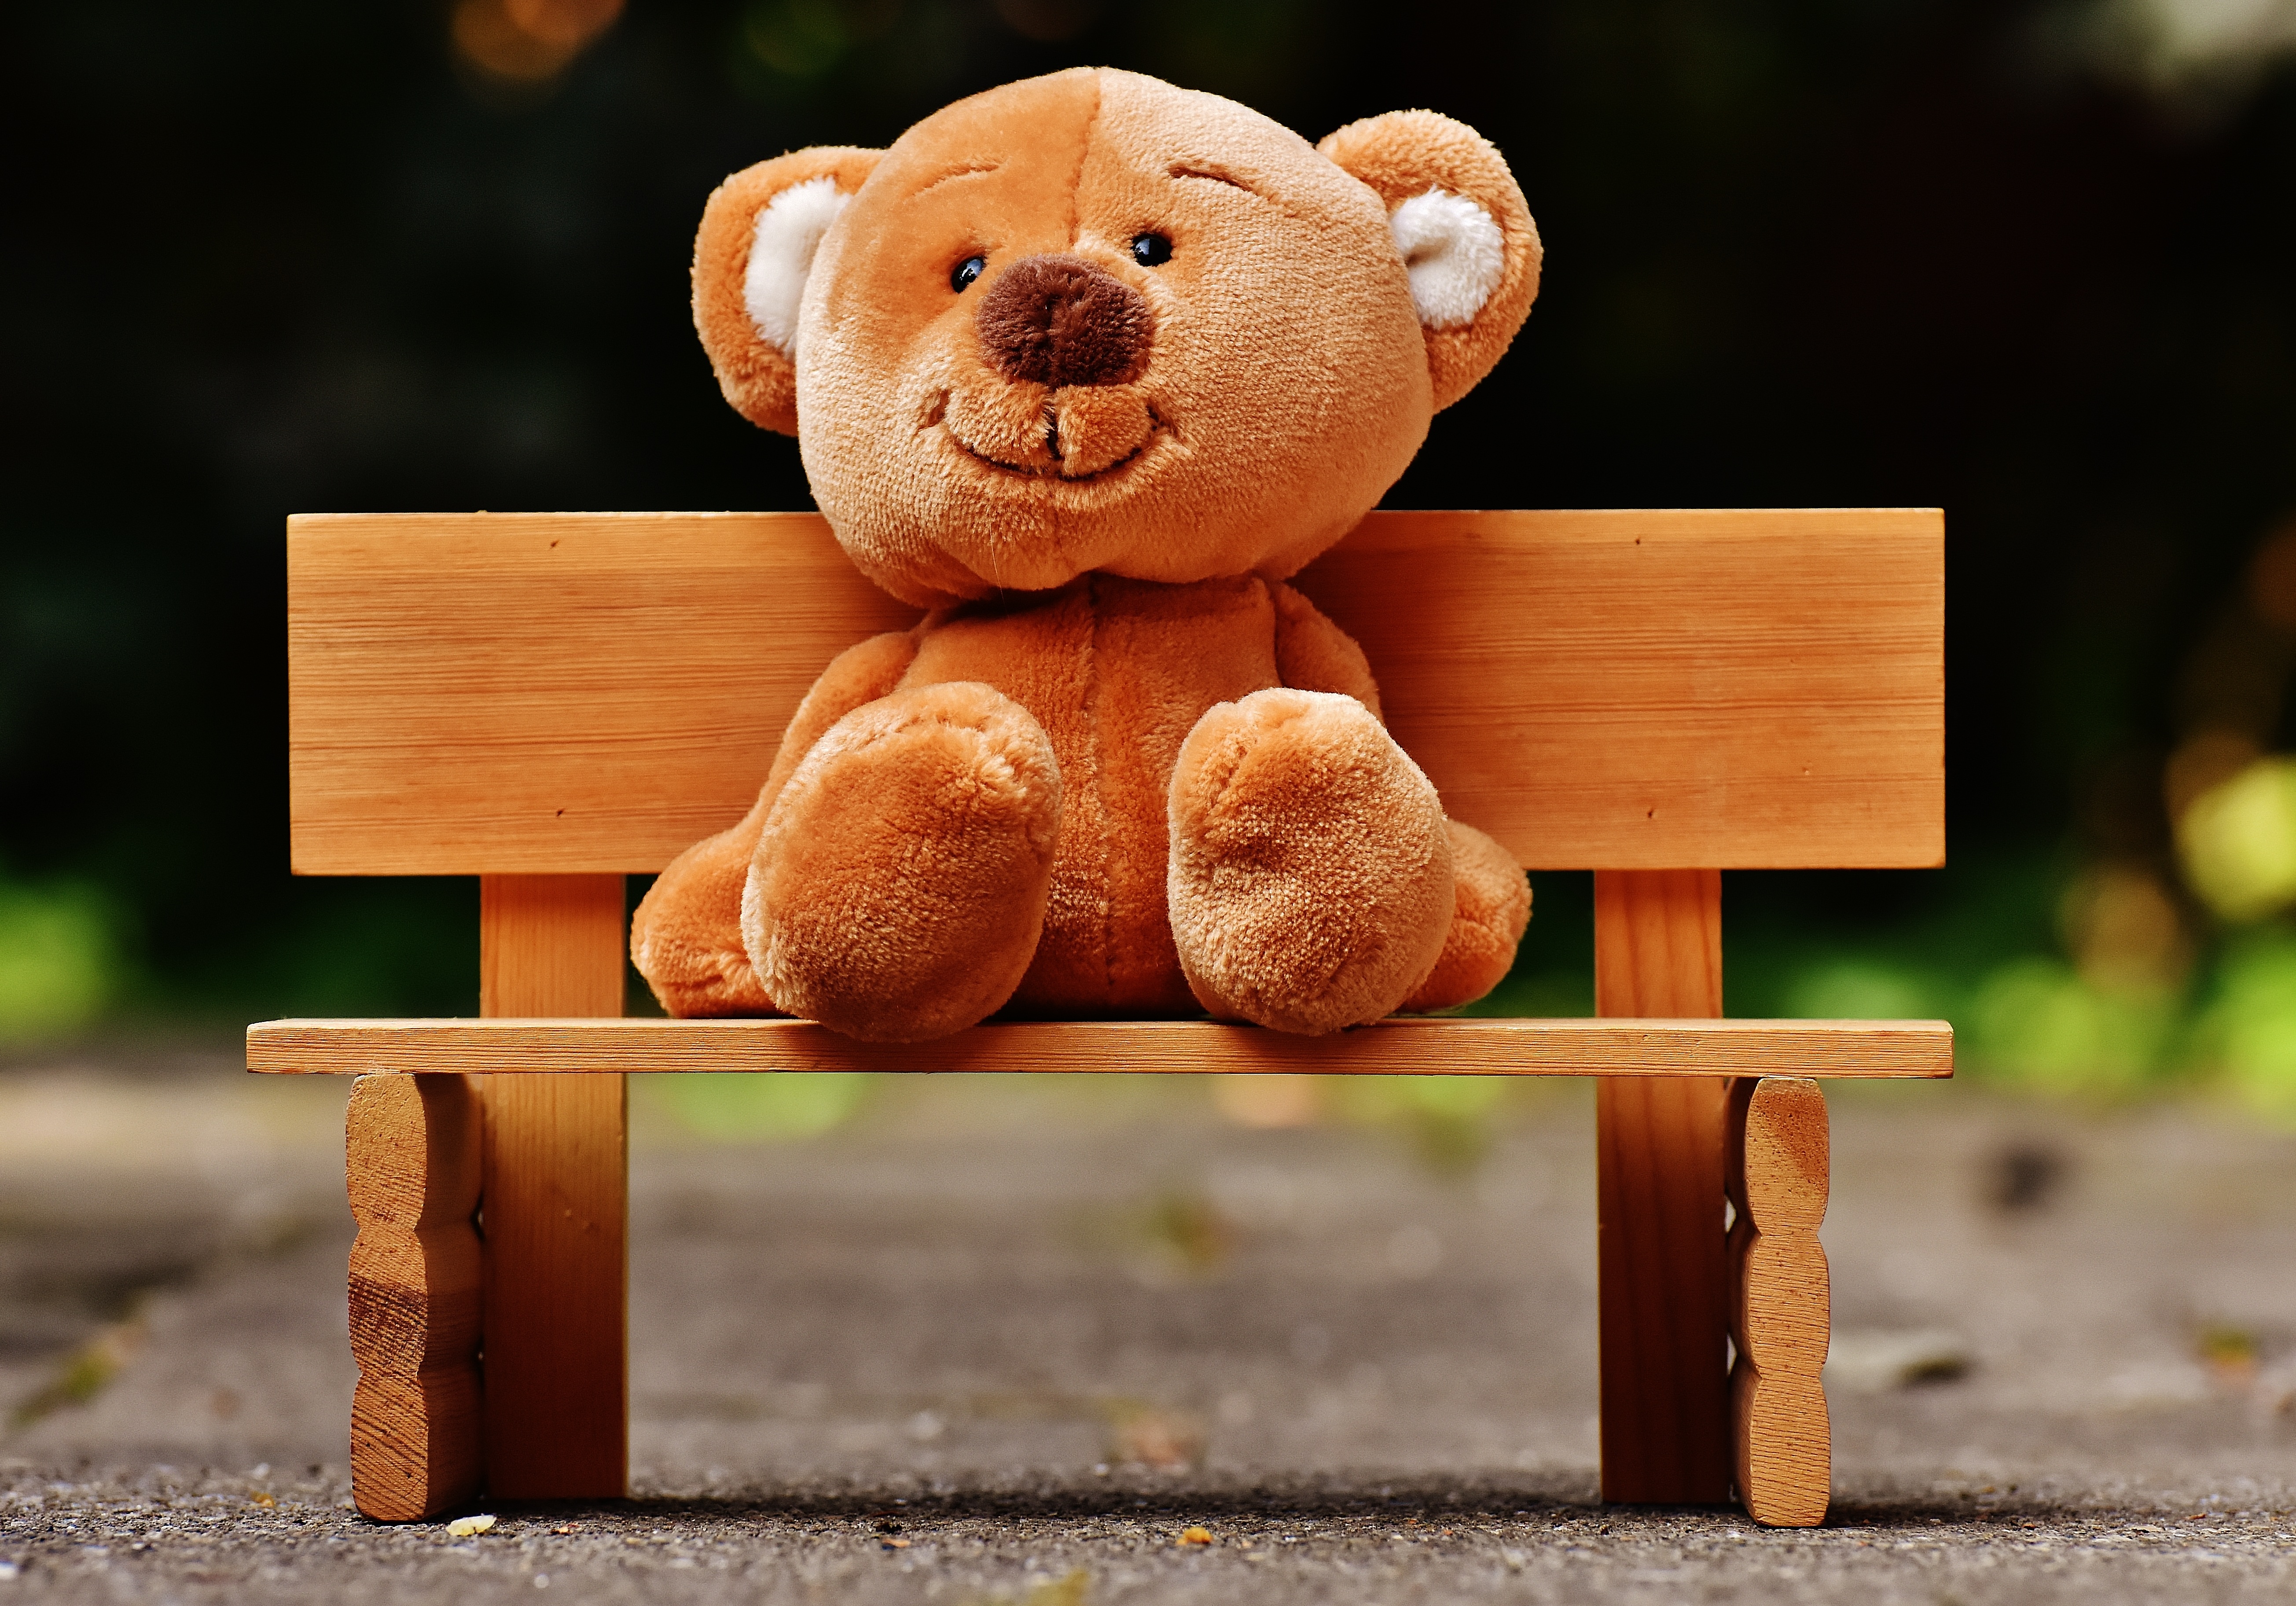 Pixabay - Happy Teddy Day 2019 , HD Wallpaper & Backgrounds